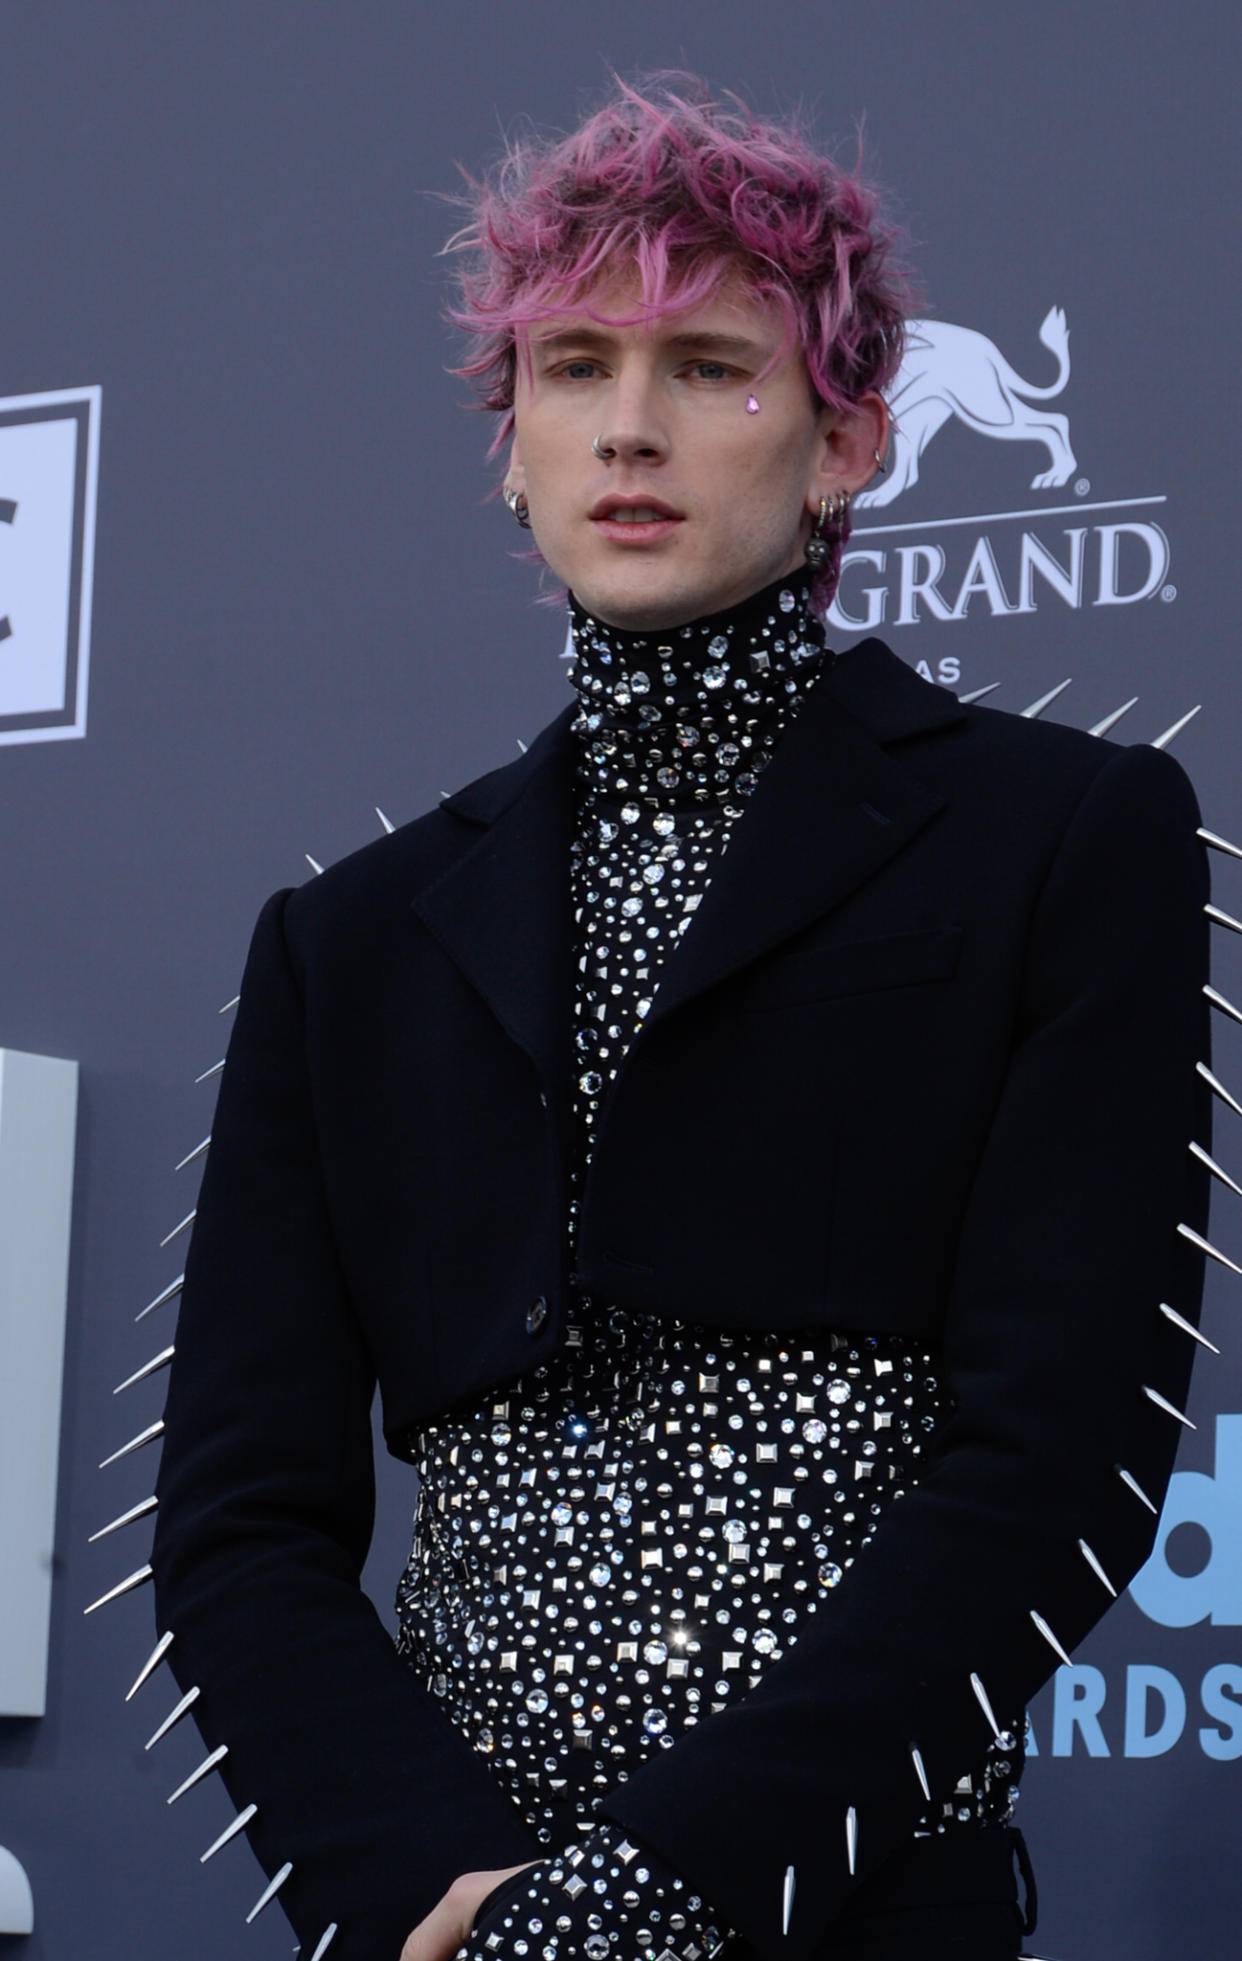 LAS VEGAS, NEVADA - MAY 15:  Machine Gun Kelly attends the 2022 Billboard Music Awards at MGM Grand Garden Arena on May 15, 2022 in Las Vegas, Nevada. (Photo by Mindy Small/FilmMagic)